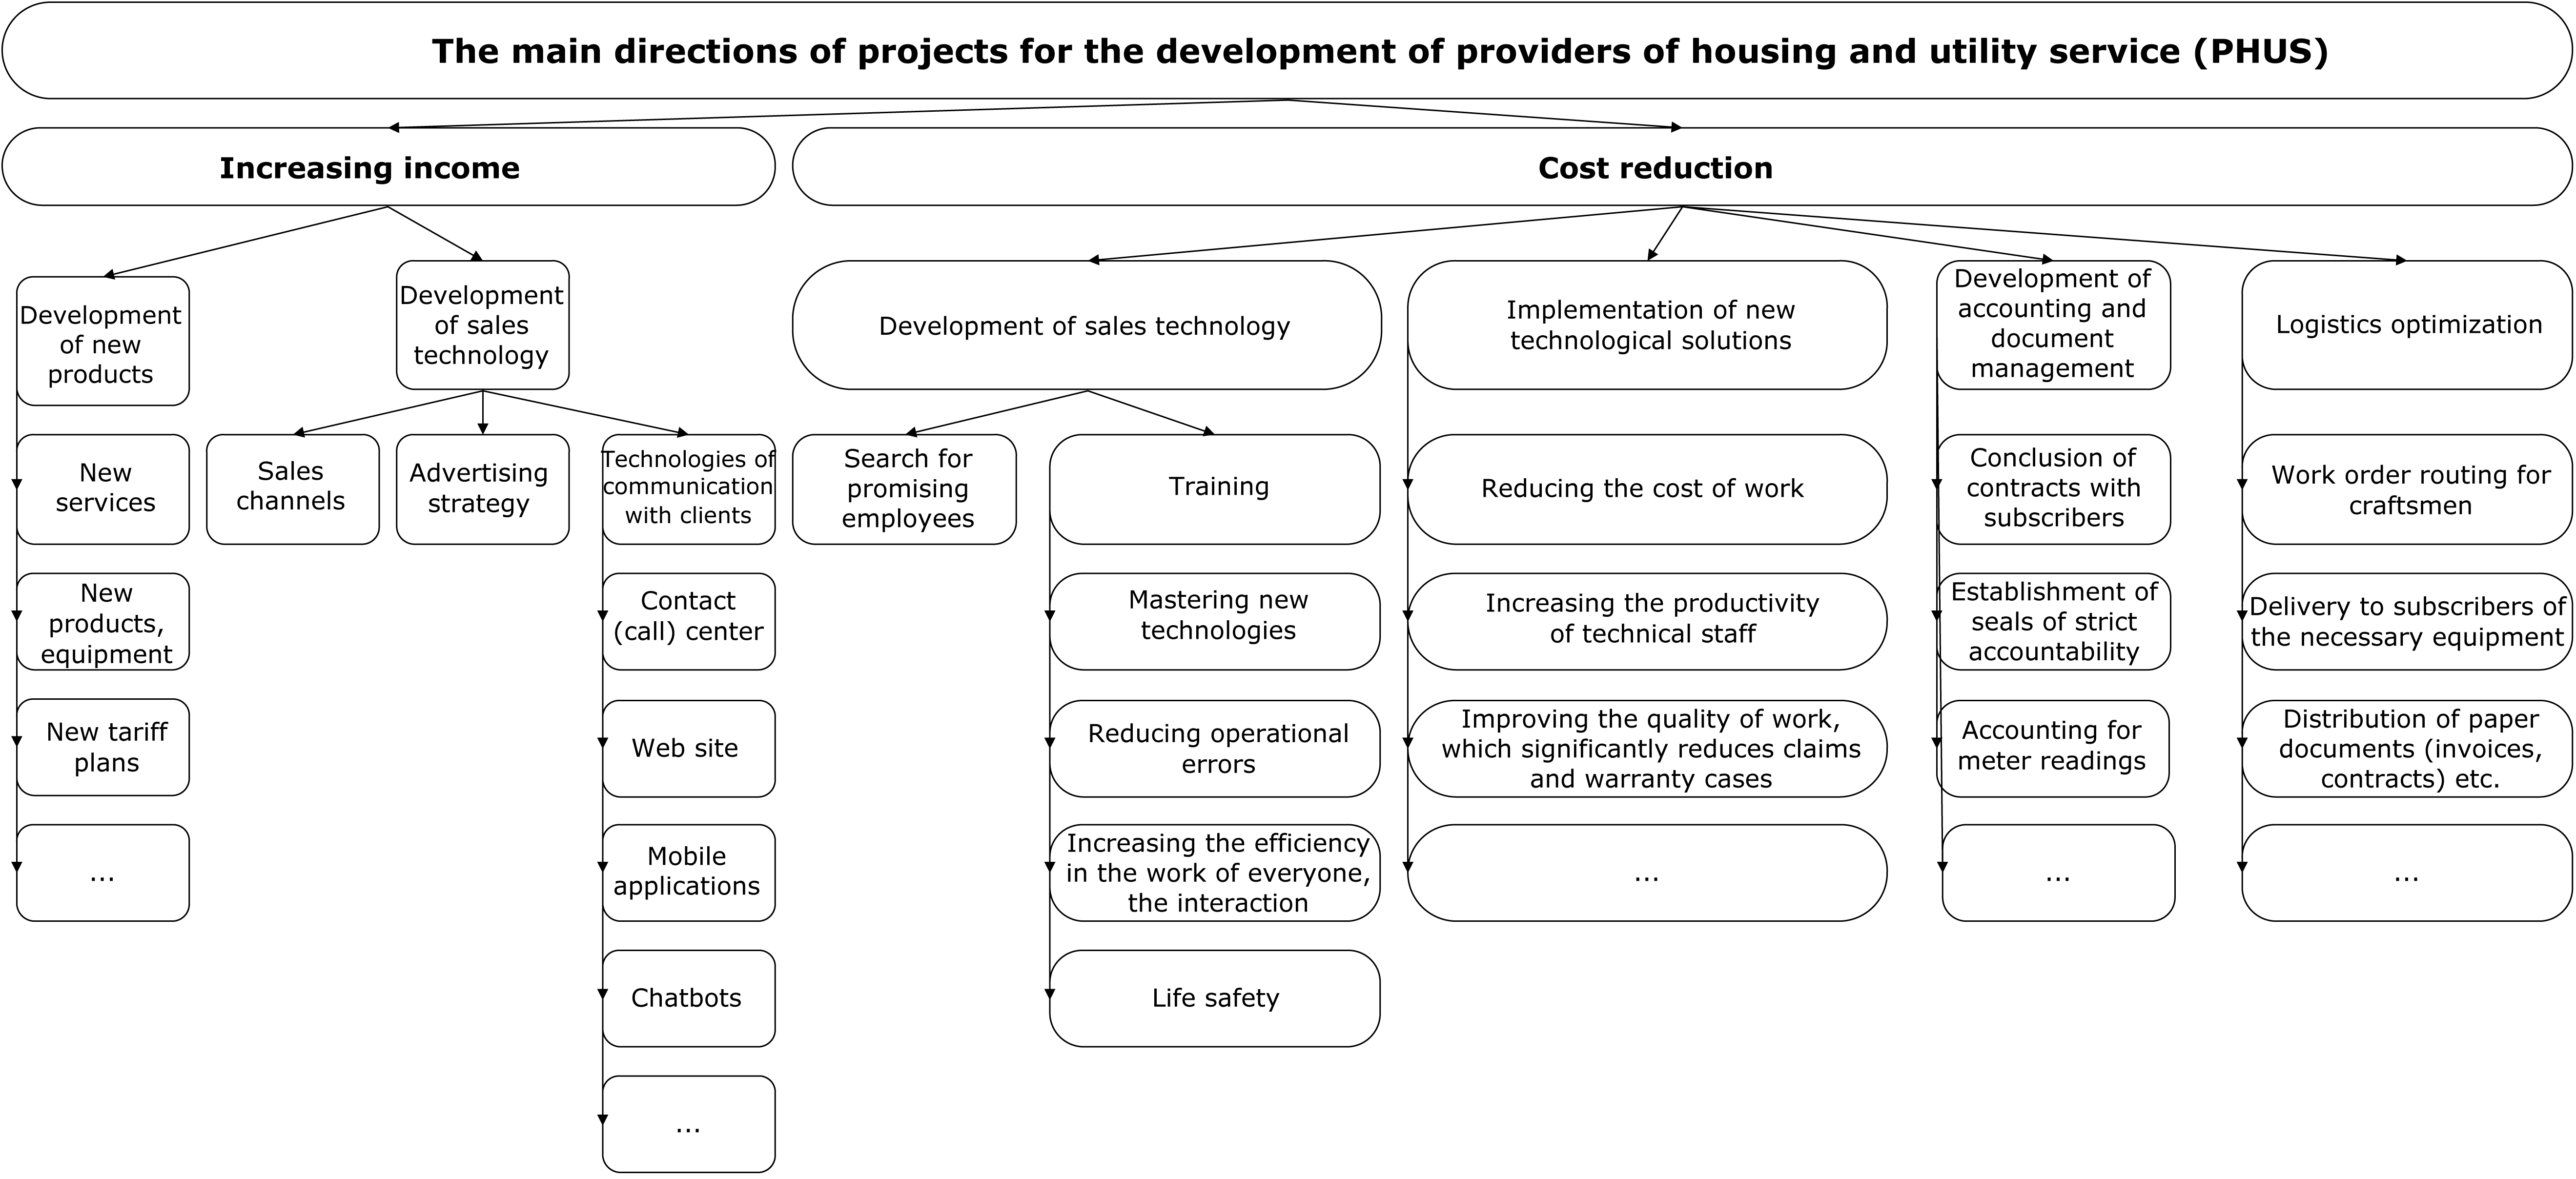 Development of a risk management method for development projects of providers of housing and utility services